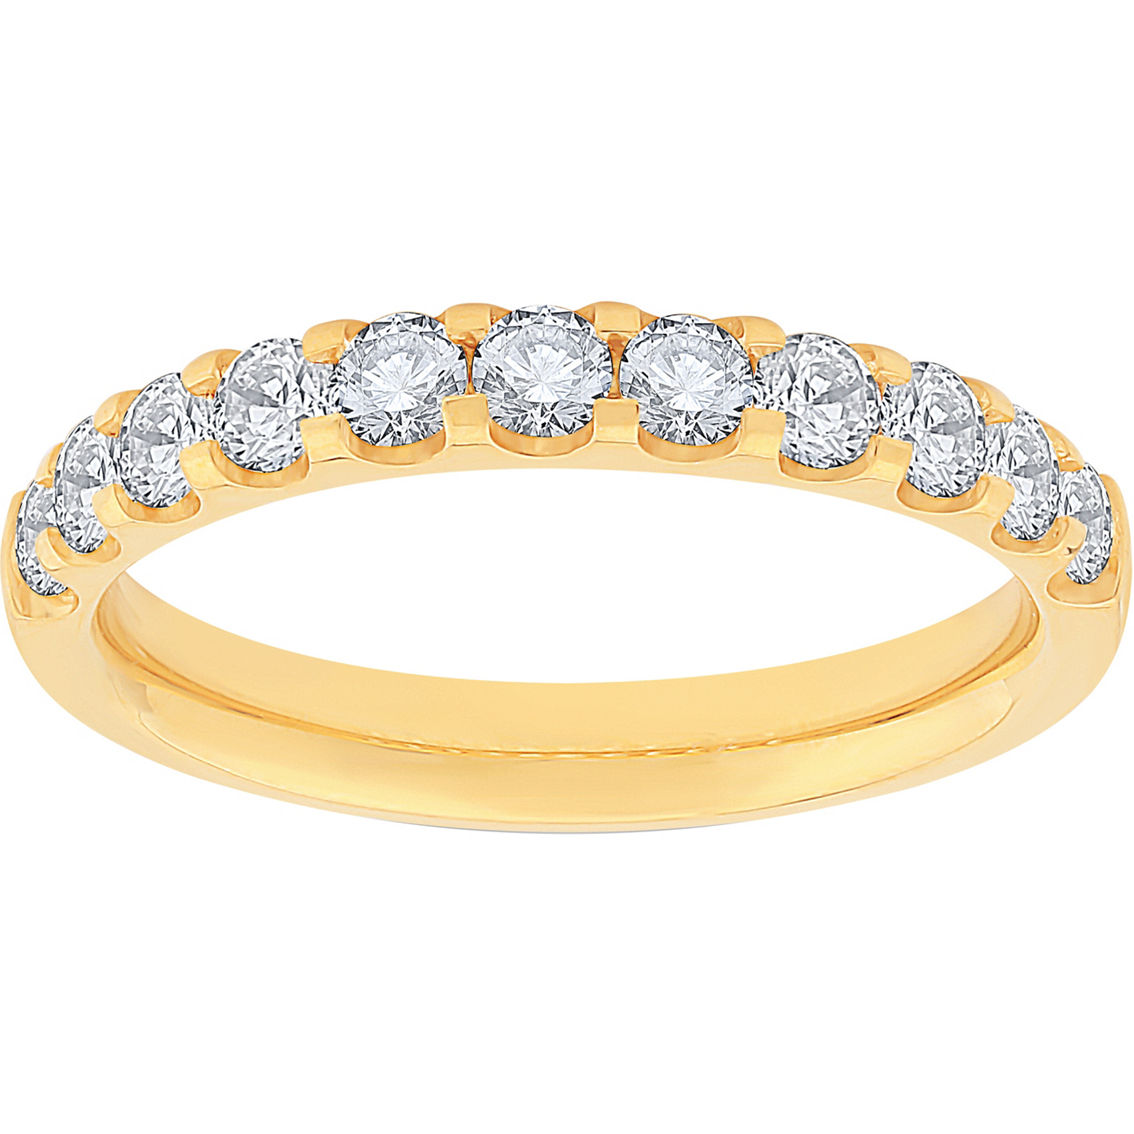 From the Heart 14K Yellow Gold 1/2 CTW Lab Grown Diamond Half Eternity Ring - Image 2 of 2